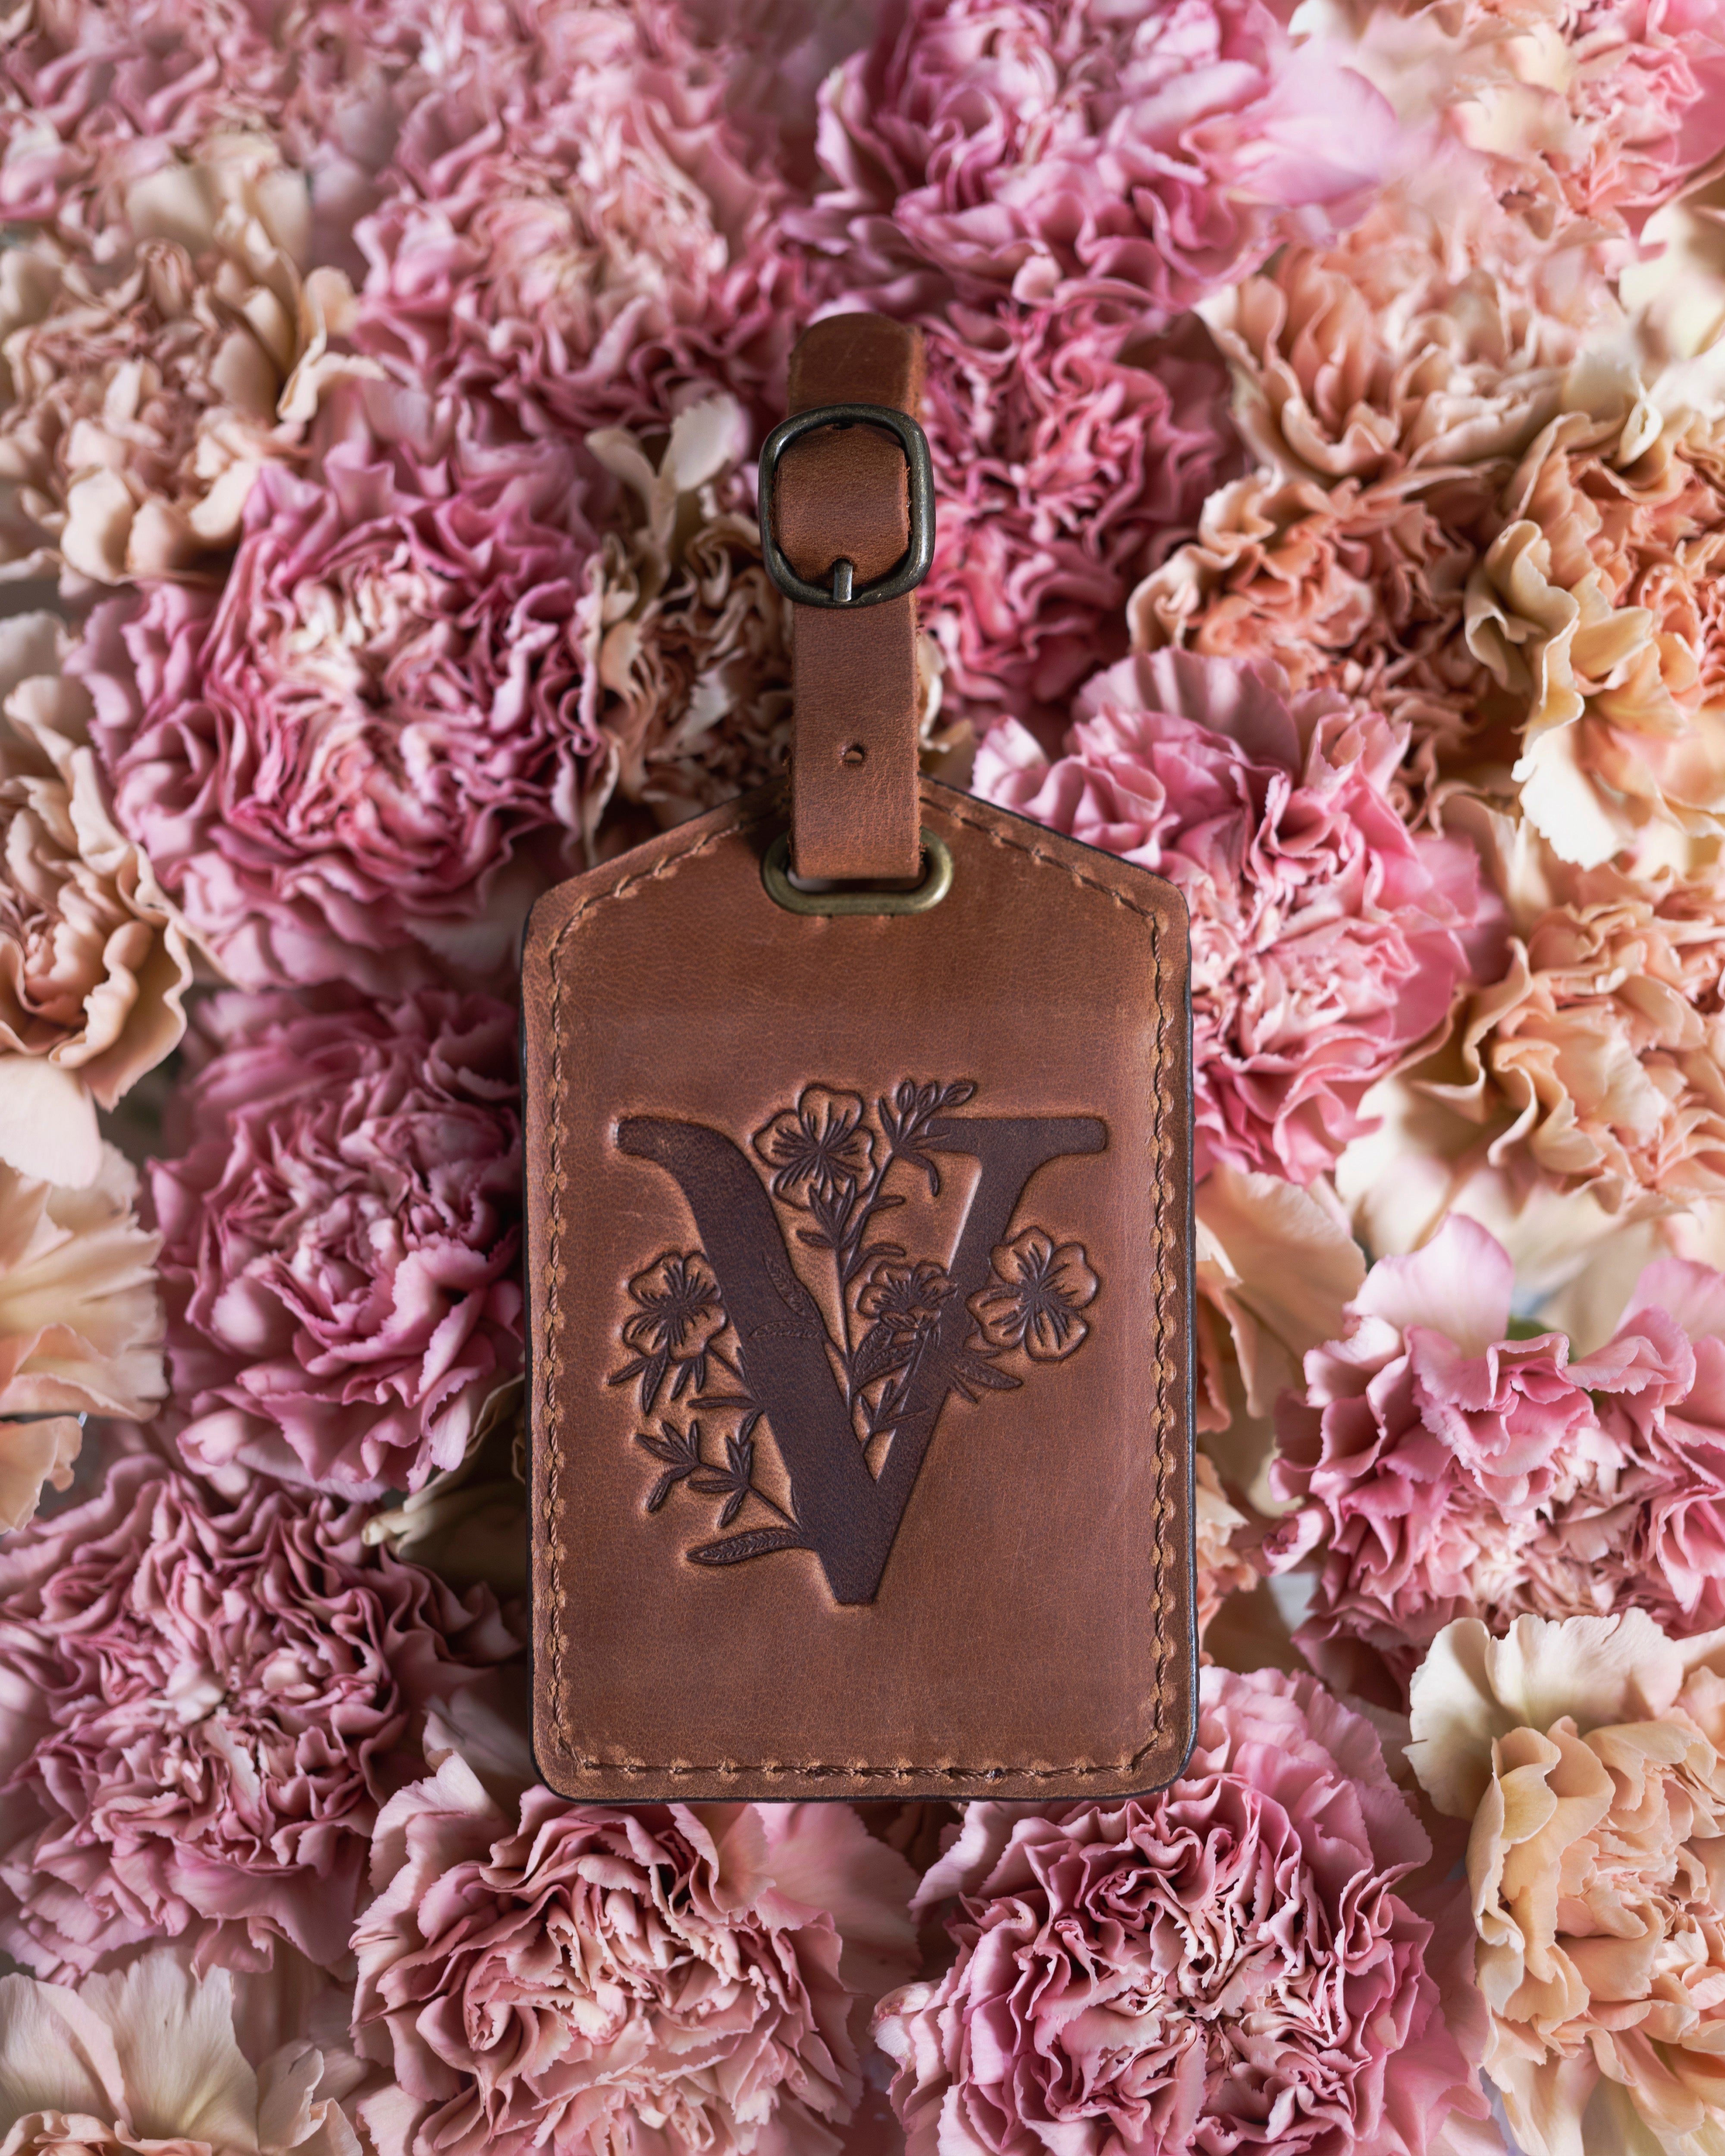 Flower initial luggage tags